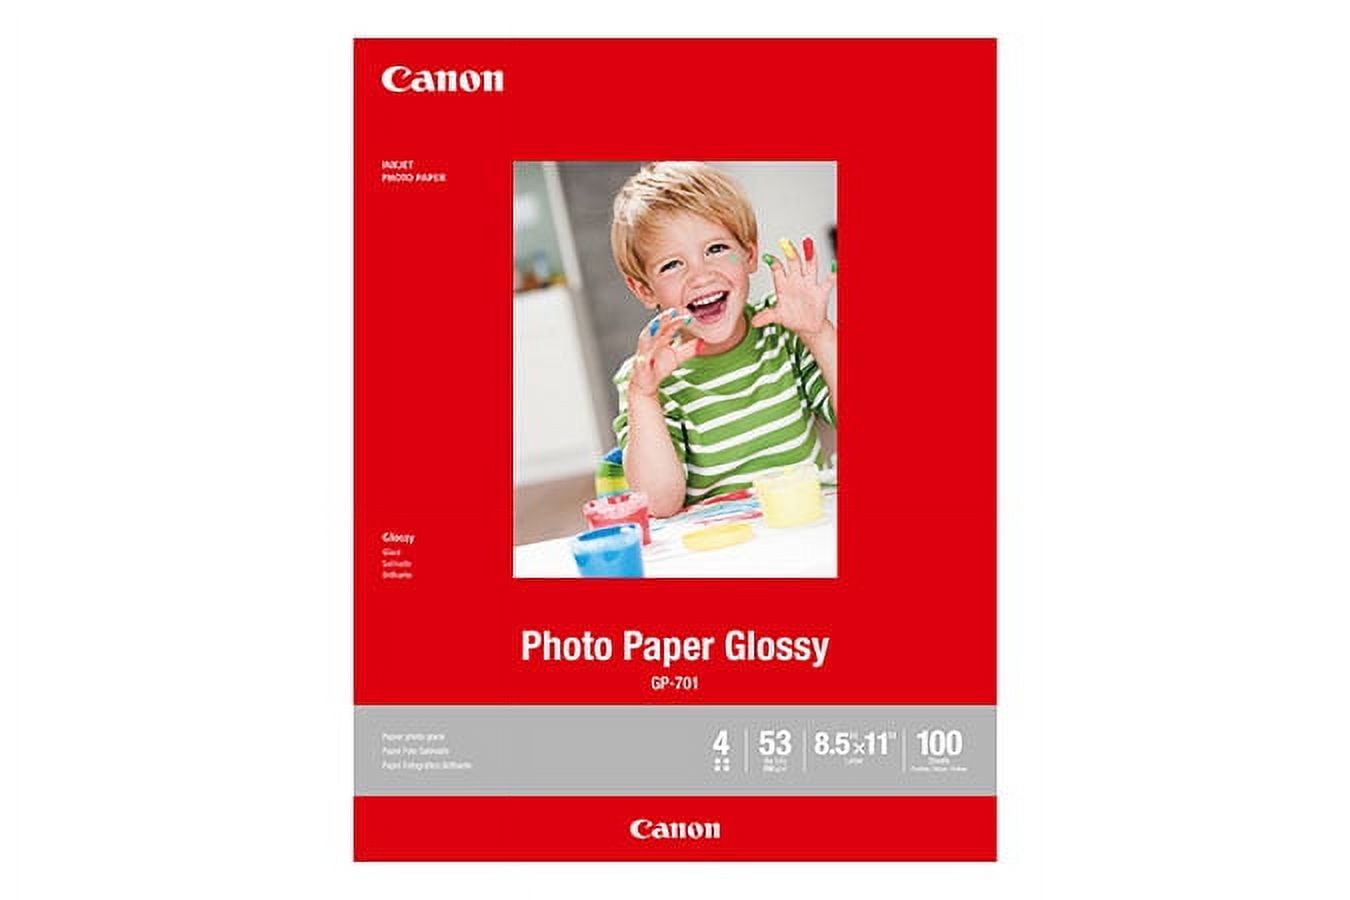 Glossy Photo Paper For Printer 8.5 x 11” x 100 Sheets - Picture Paper for  Printer - Works with Inkjet Printer - Professional Standard // Paper Plan